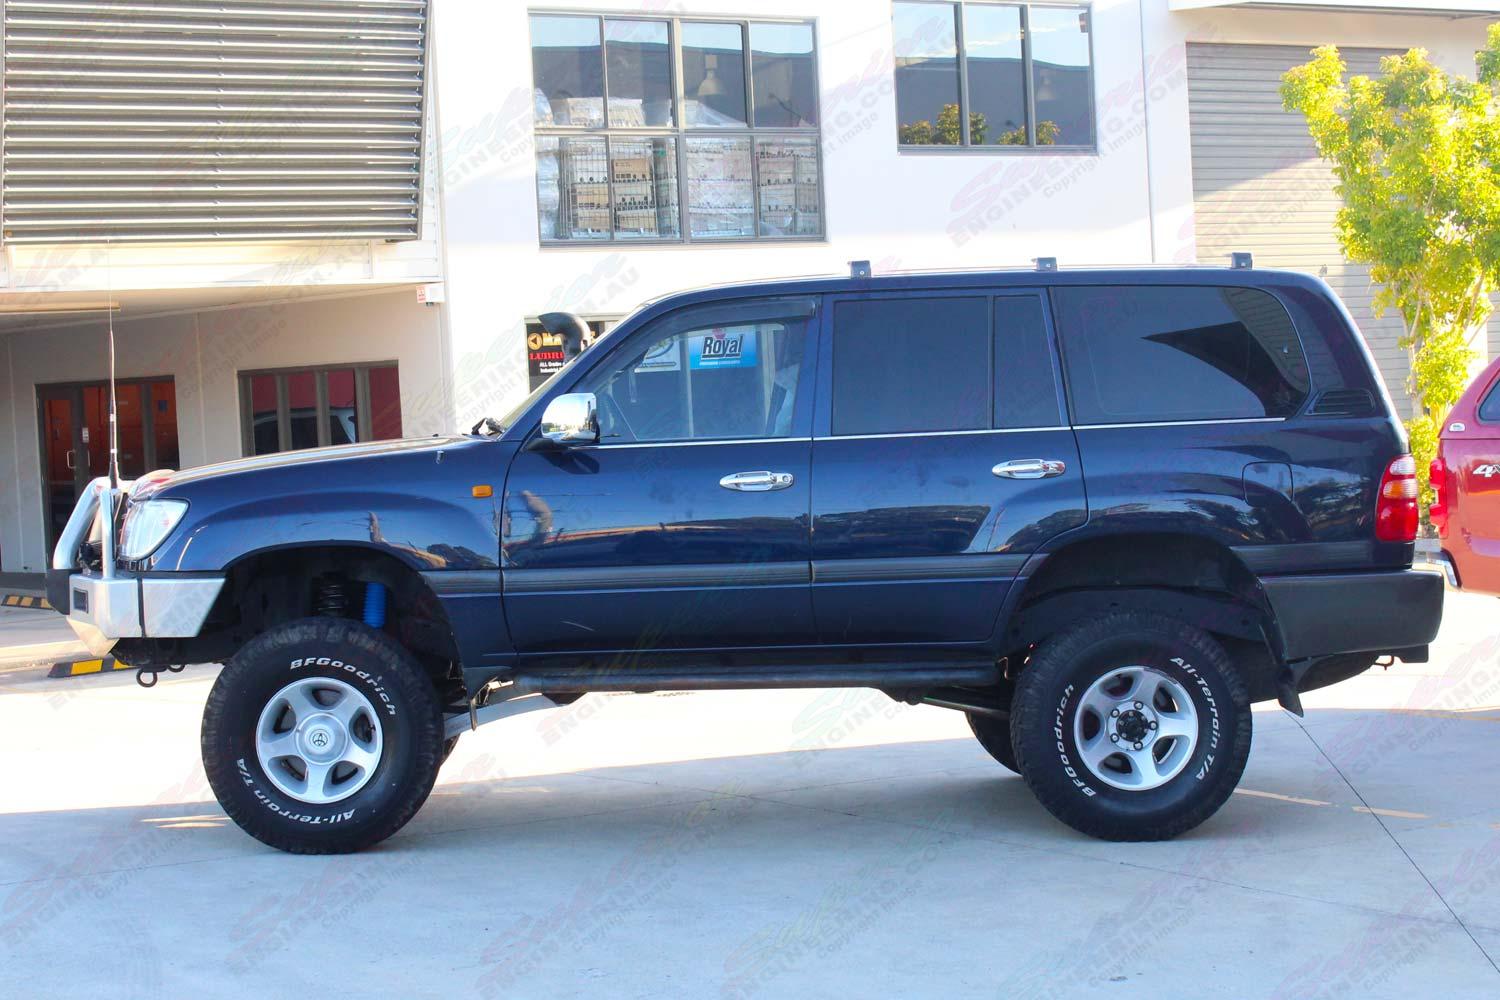 is it legal to lift your 4wd or ute in australia?